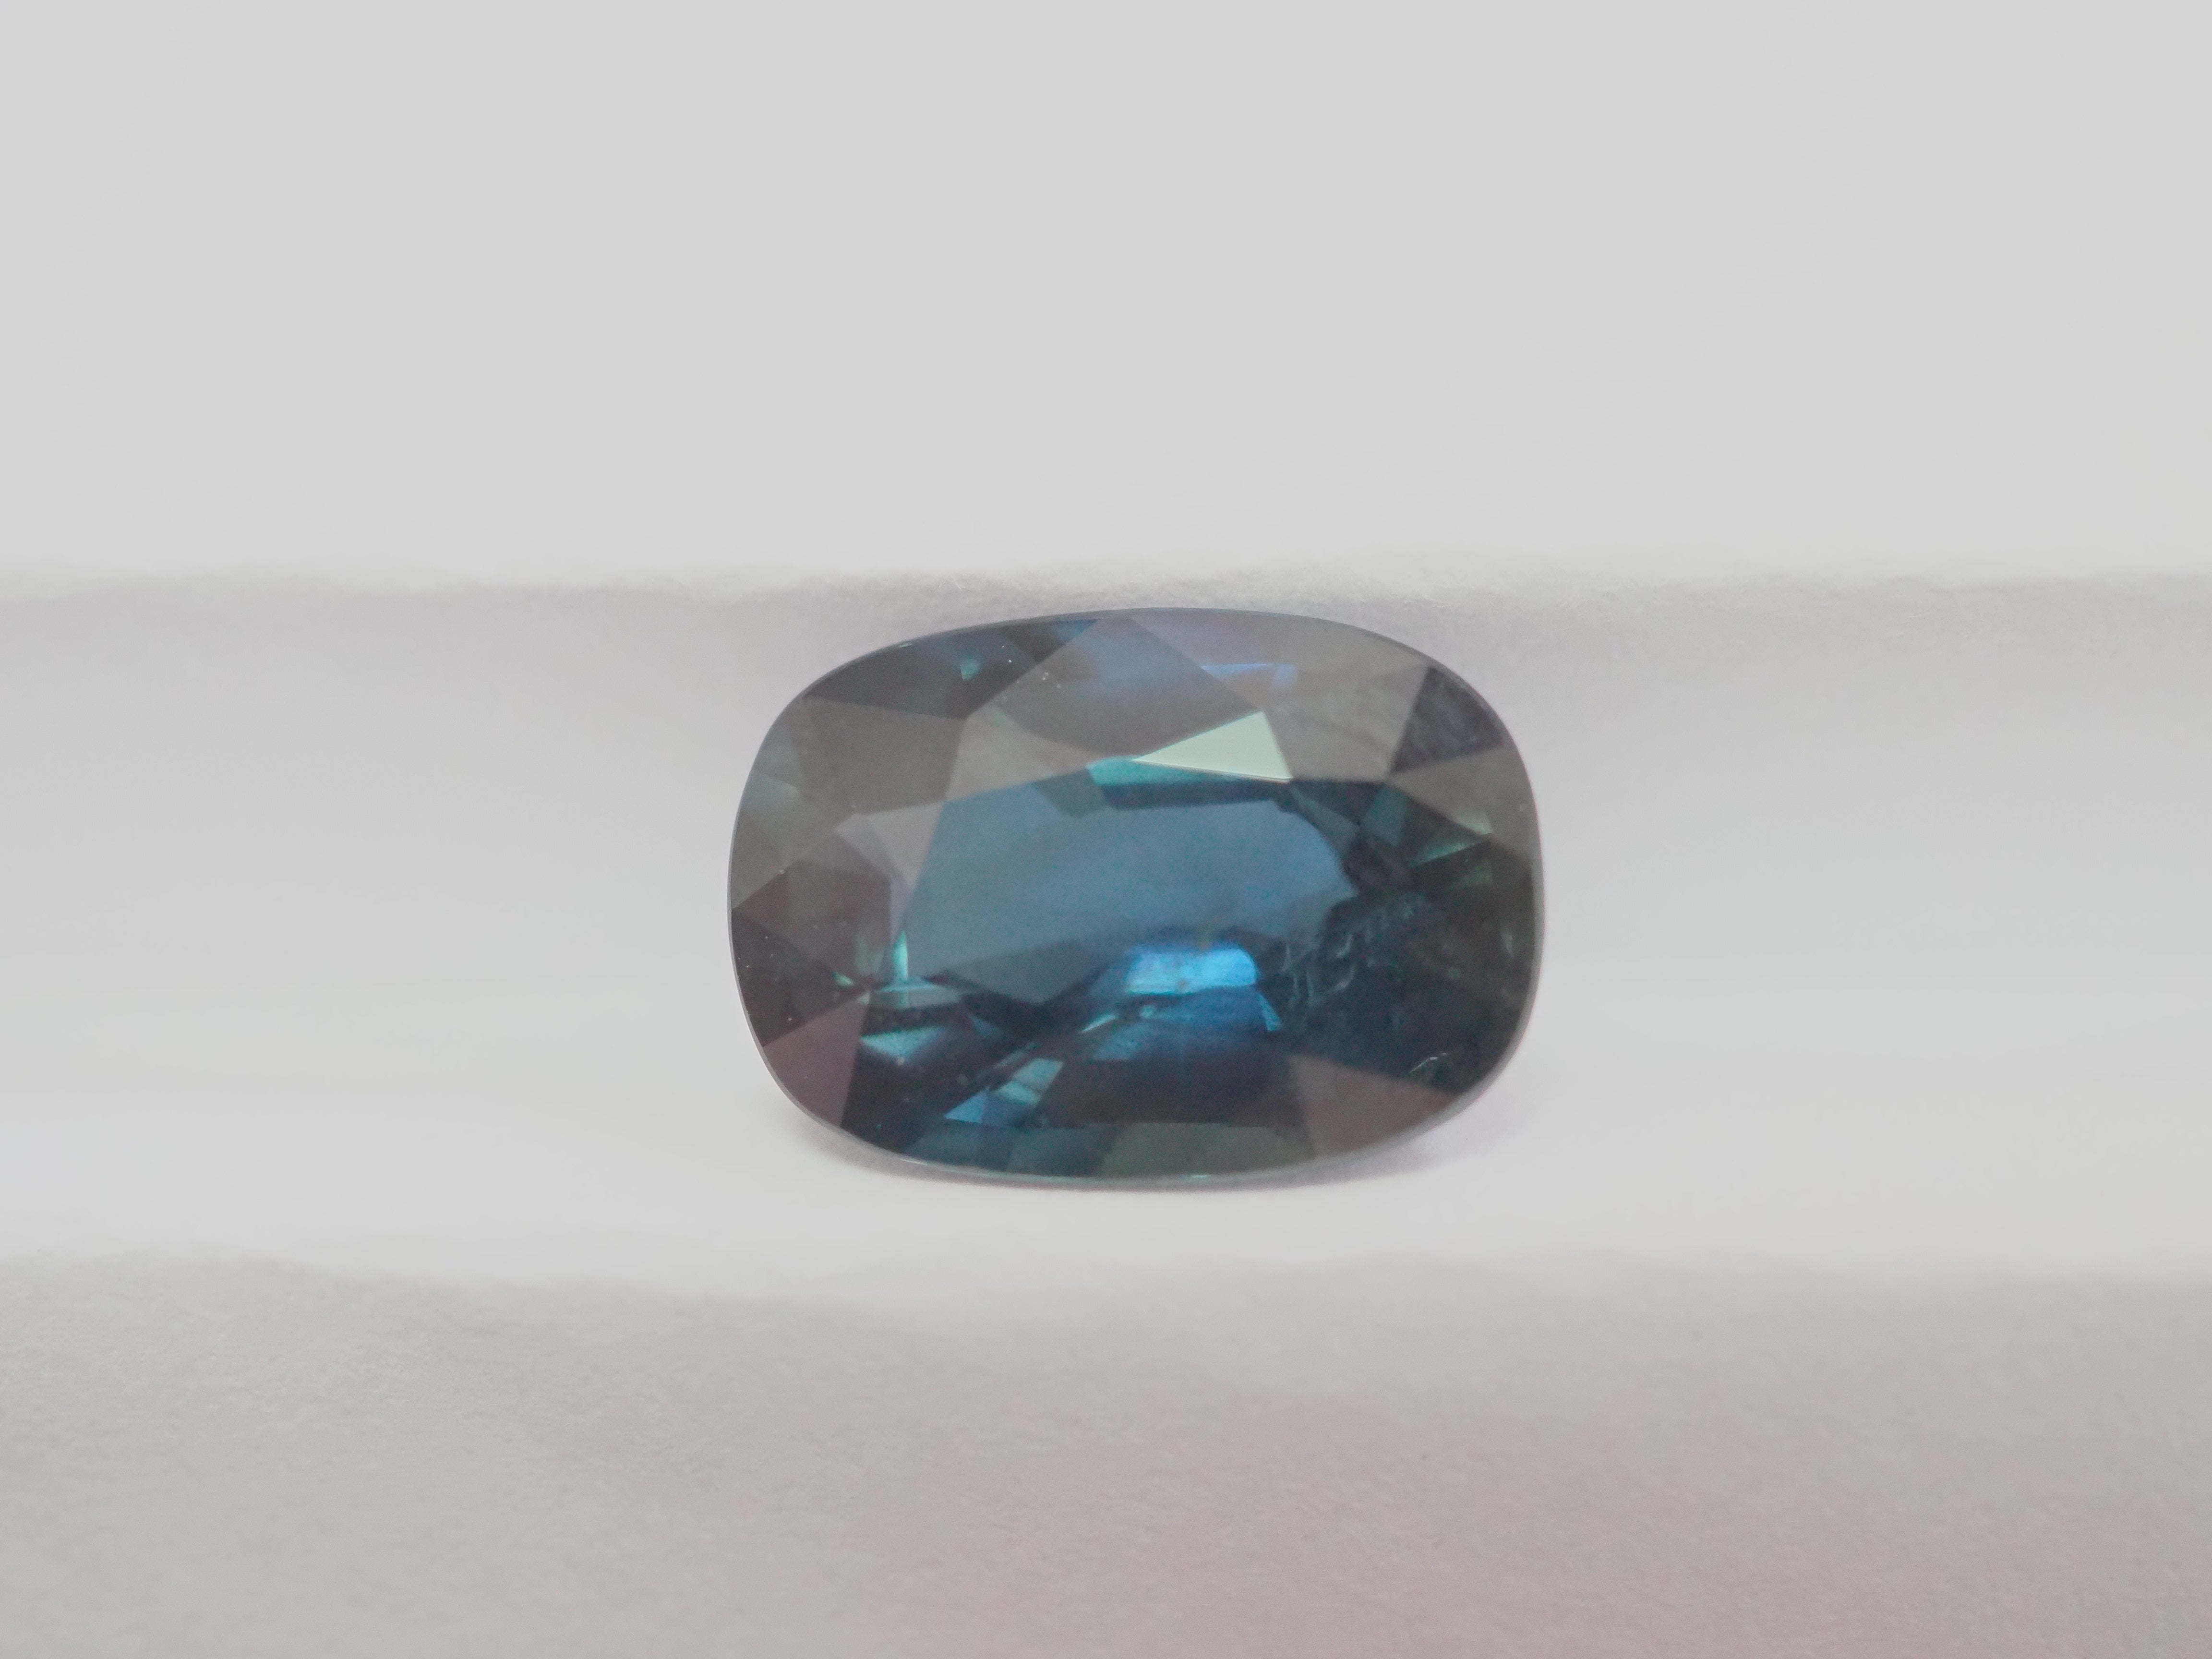 Sapphire fans please do not miss:
This particular Thai sapphire has a greenish blue color or can be called Teal color. The cut is a cushion cut and was polished in Thailand. Sparkling well in the sun with good saturation of color.

This gemstone has